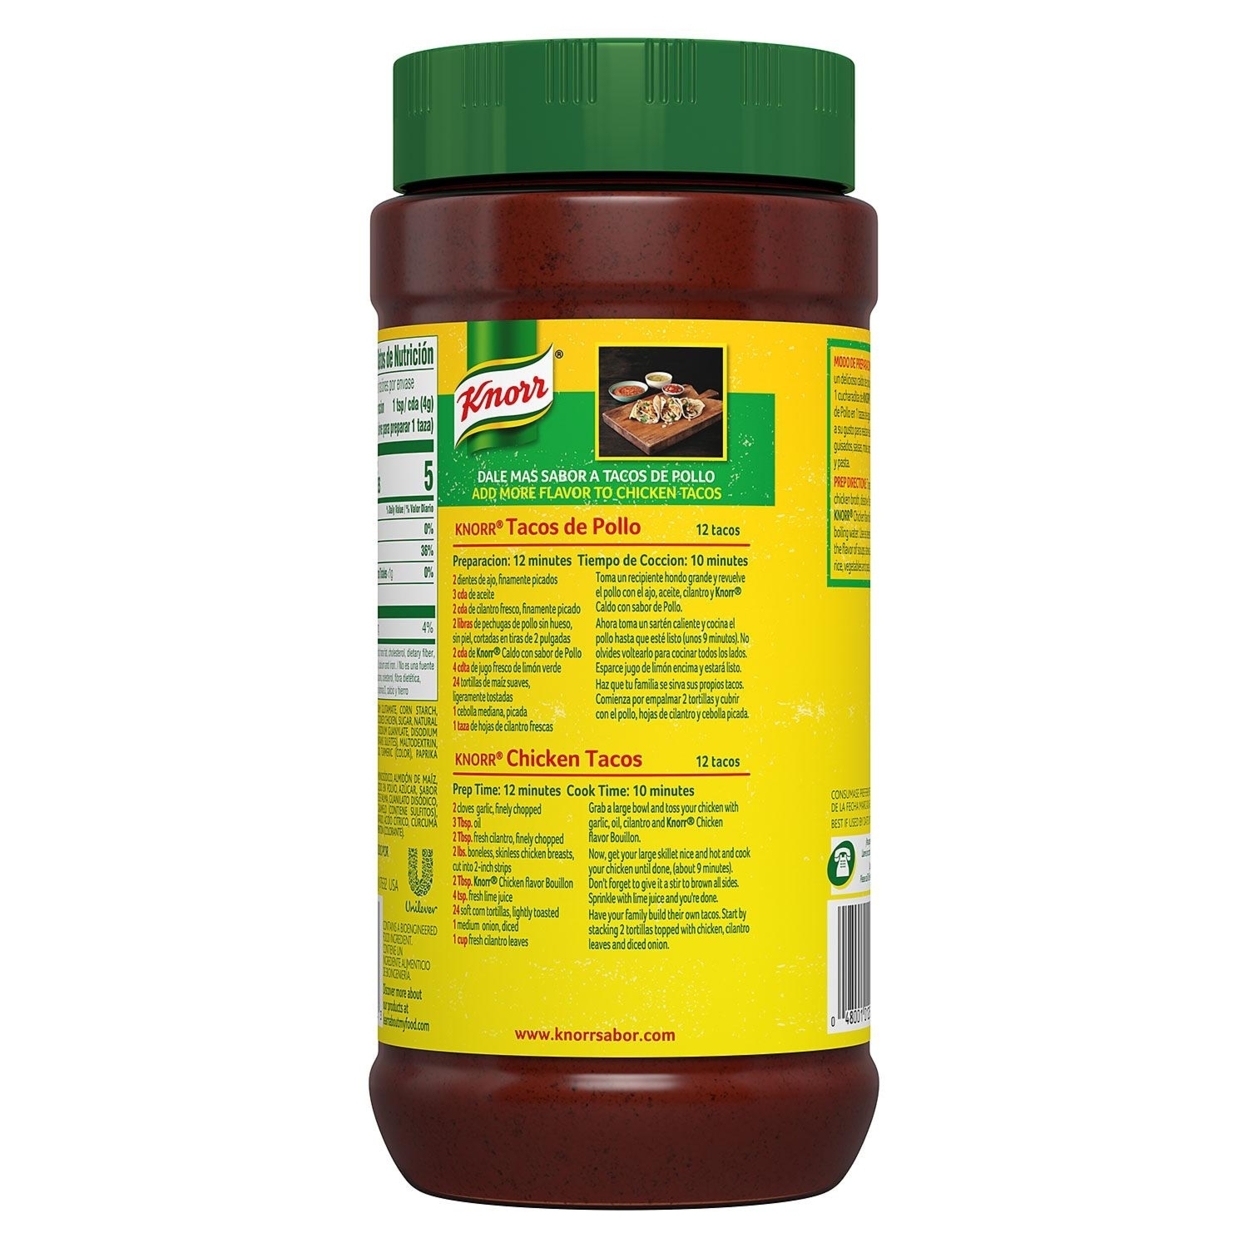 Knorr Granulated Chicken Bouillon (40 Ounce)